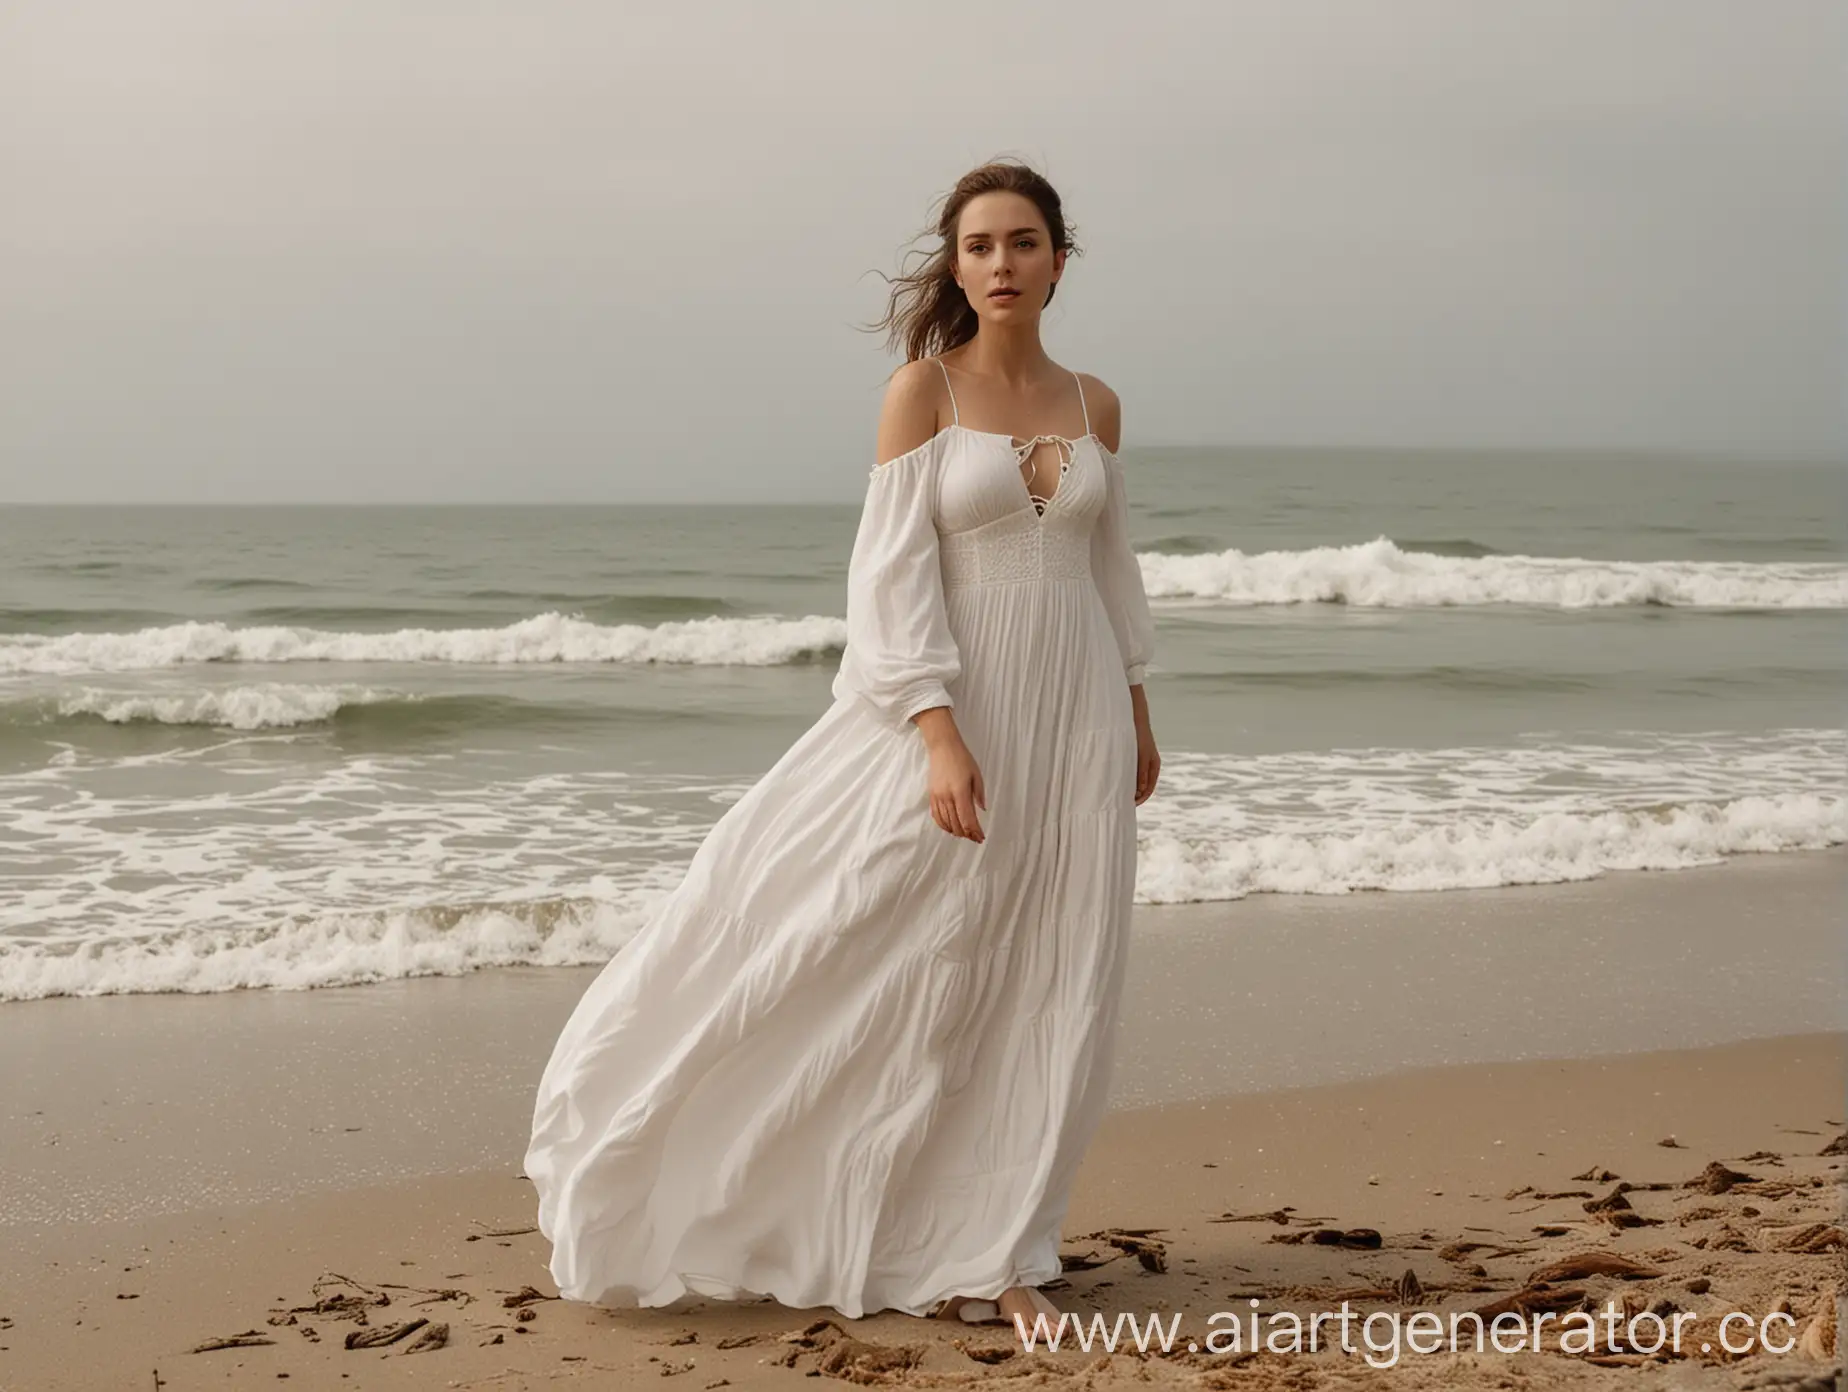 Woman-in-Long-White-Dress-Standing-on-Beach